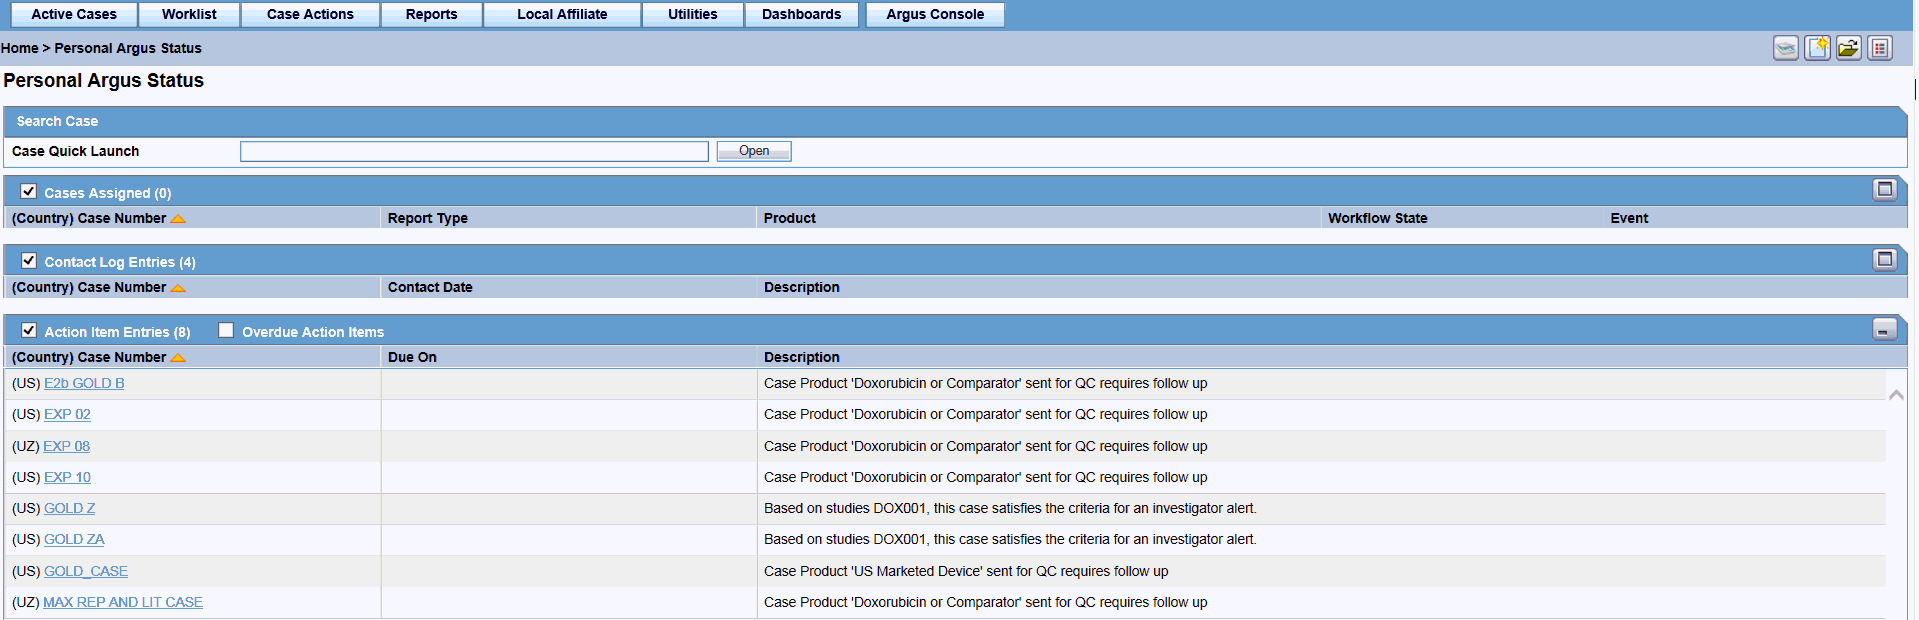 Screen capture showing the Personal Argus Status page